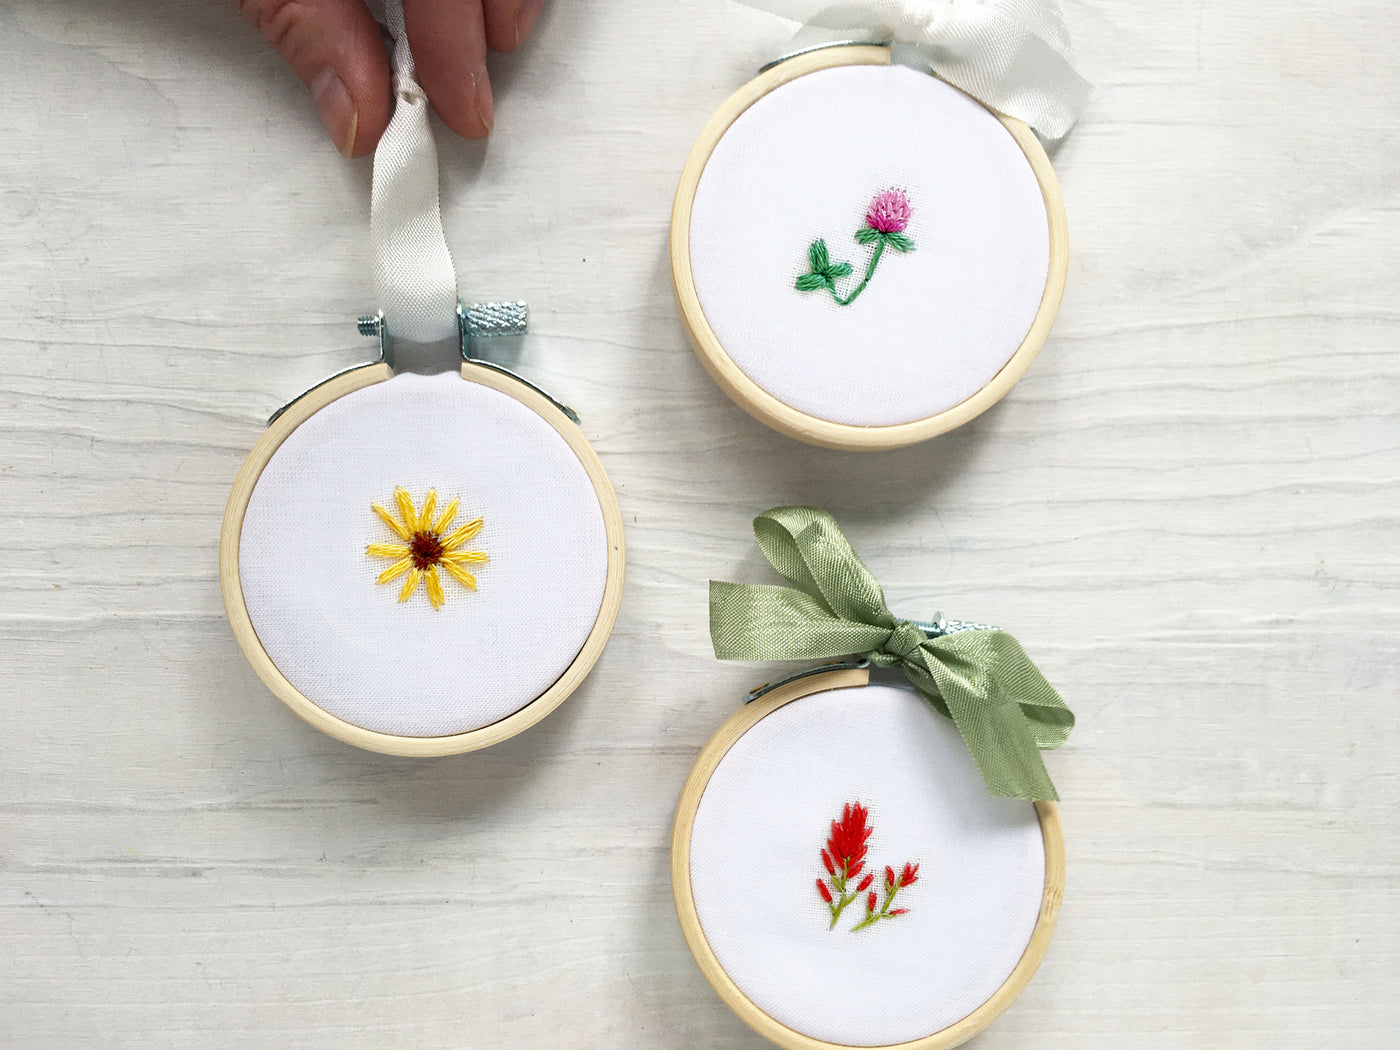 Tiny Wildflowers Hand Embroidery pattern download, mini floral design